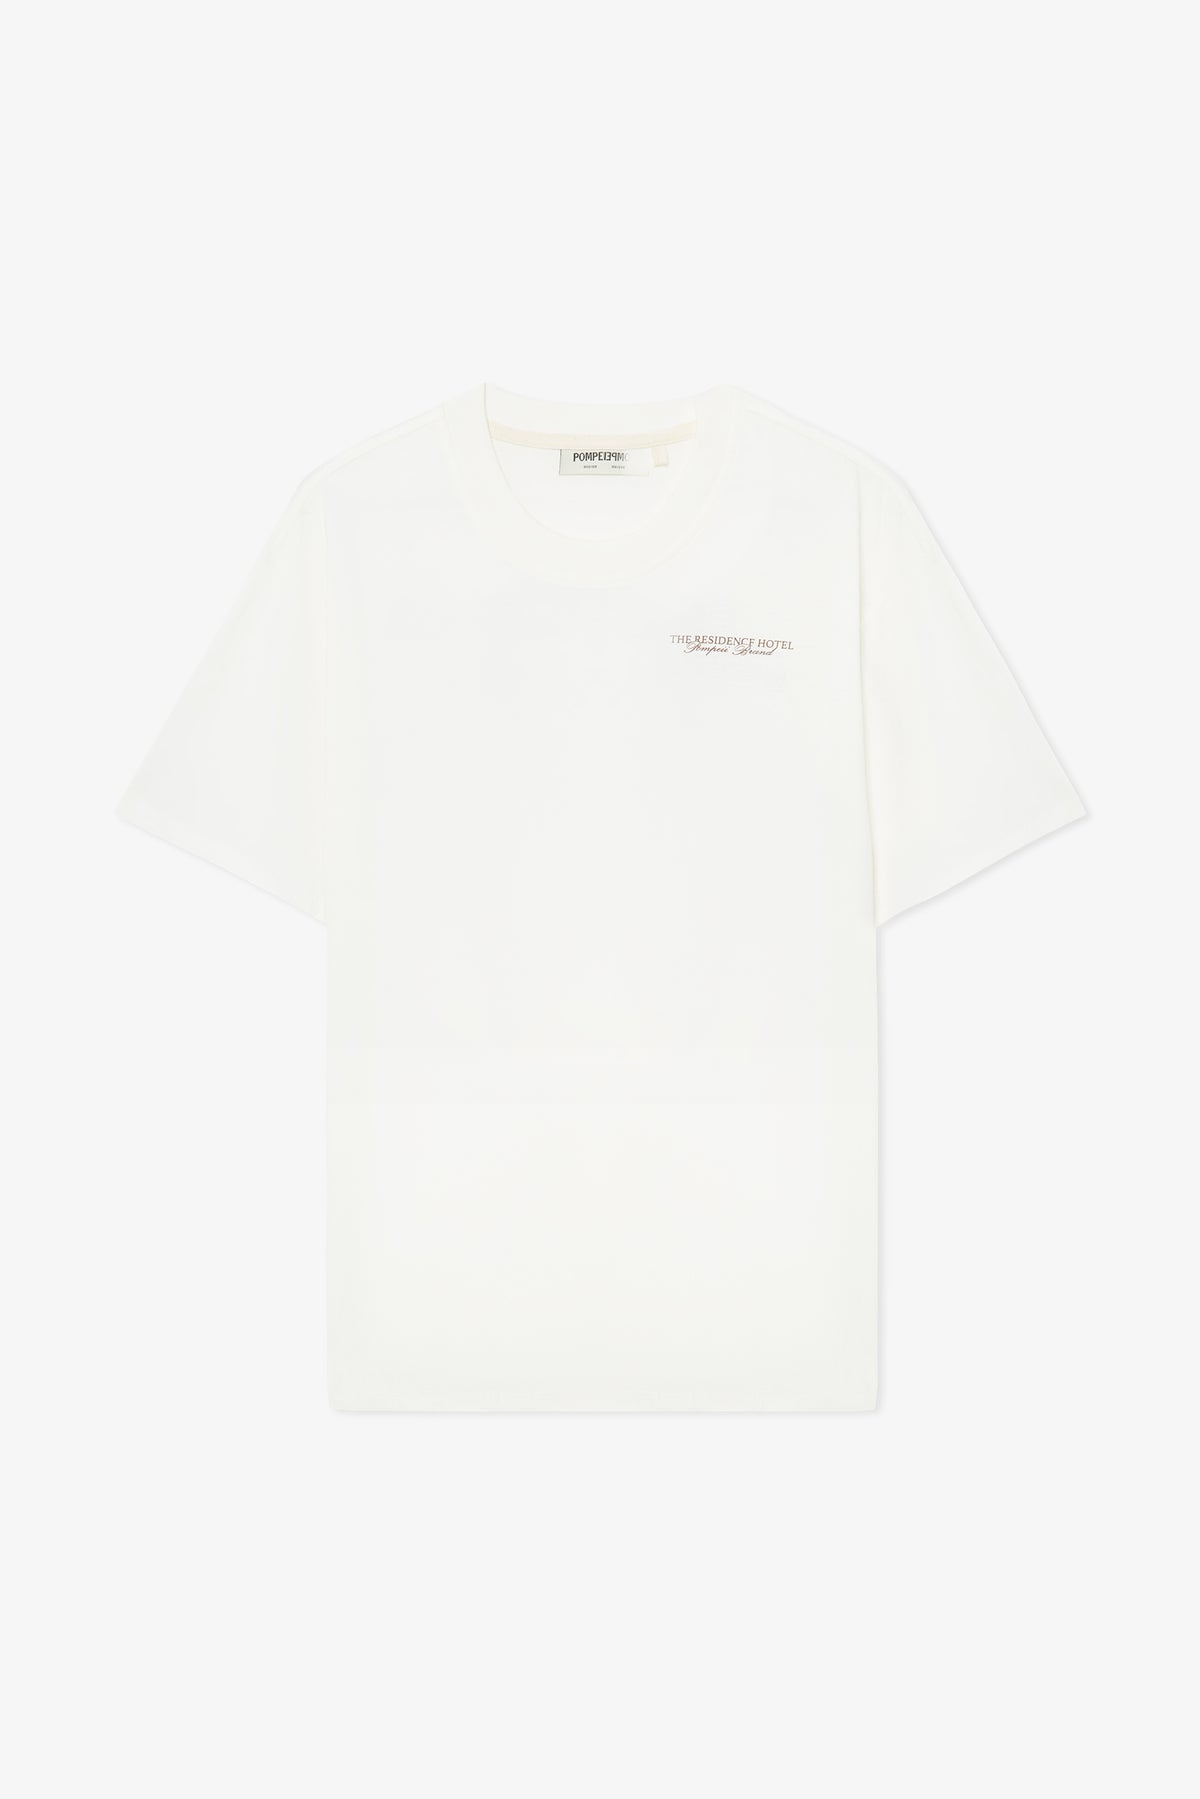 RESIDENCE GRAPHIC TEE